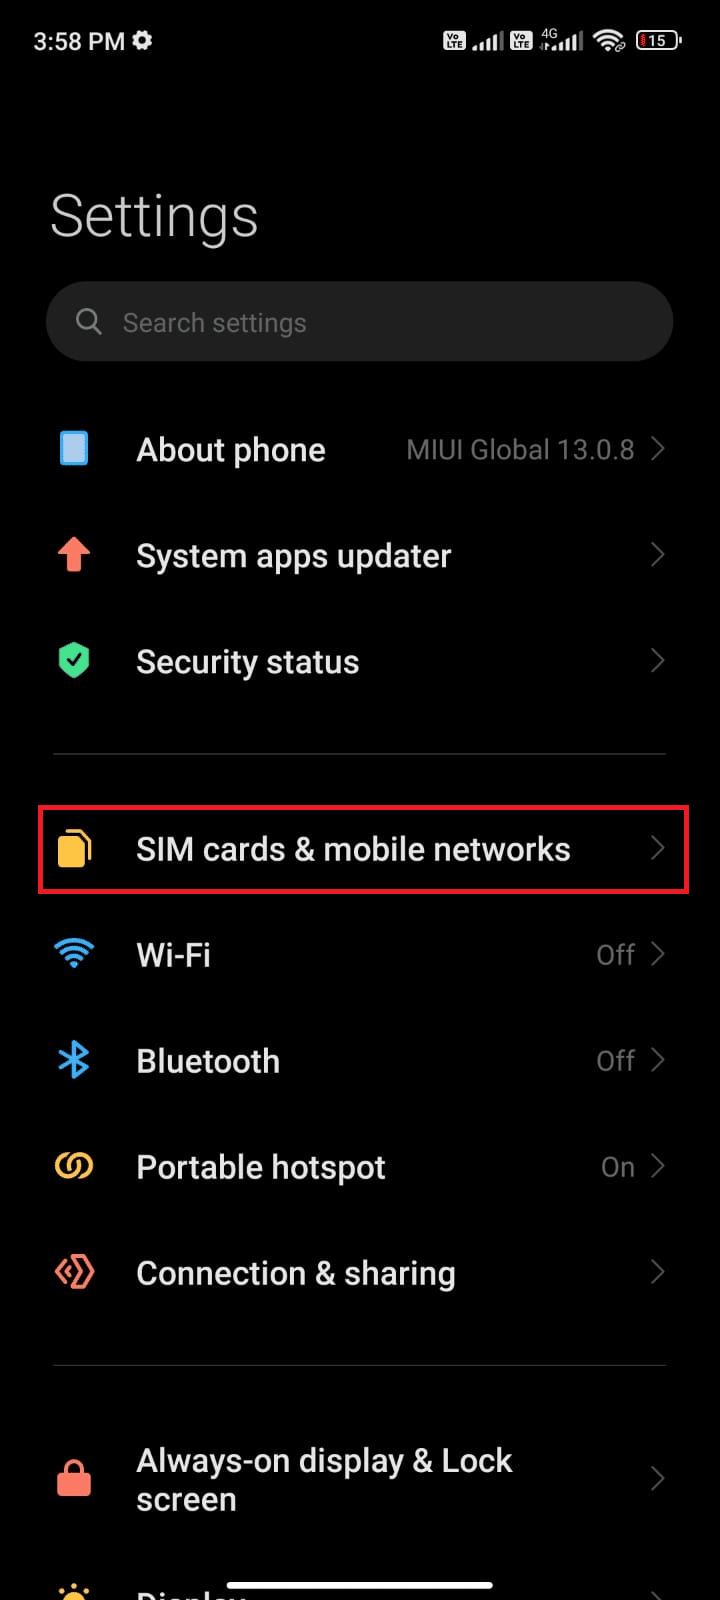 tap the SIM cards mobile networks option. Fix Facebook Keeps Crashing on Android